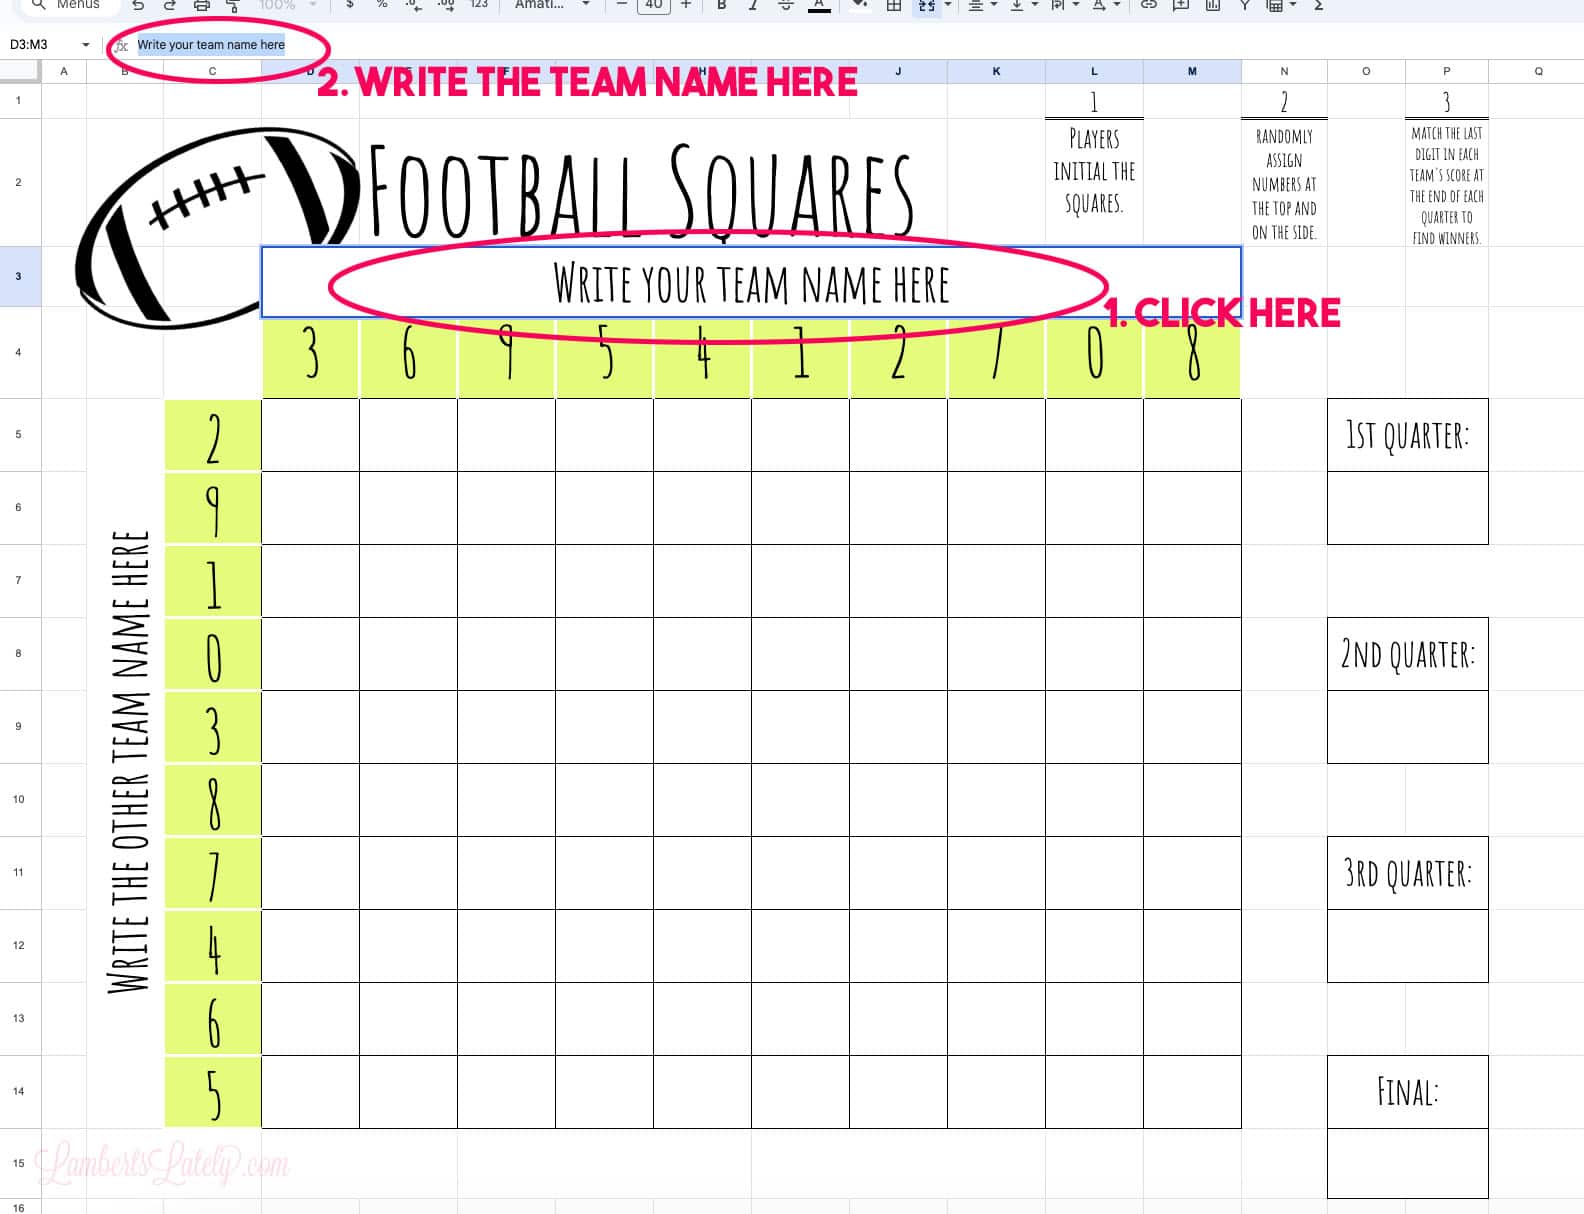 demonstration of how to write team names into the football squares template.